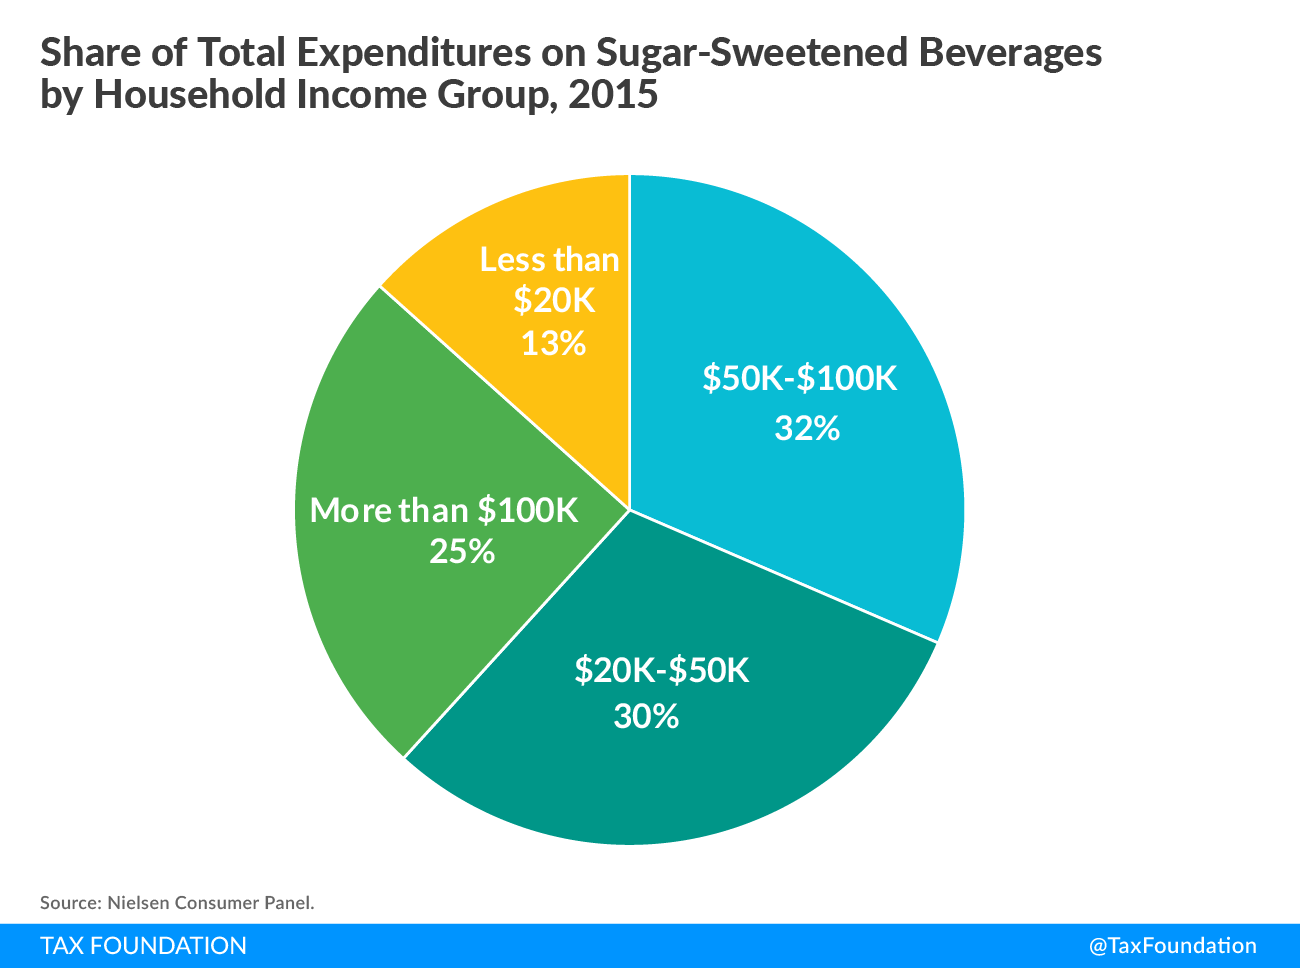 Share of Total Expenditures on Sugar-Sweetened Beverages by Household Income Group Pie Chart Soda Taxes Sugar-Sweetened Beverage Taxes